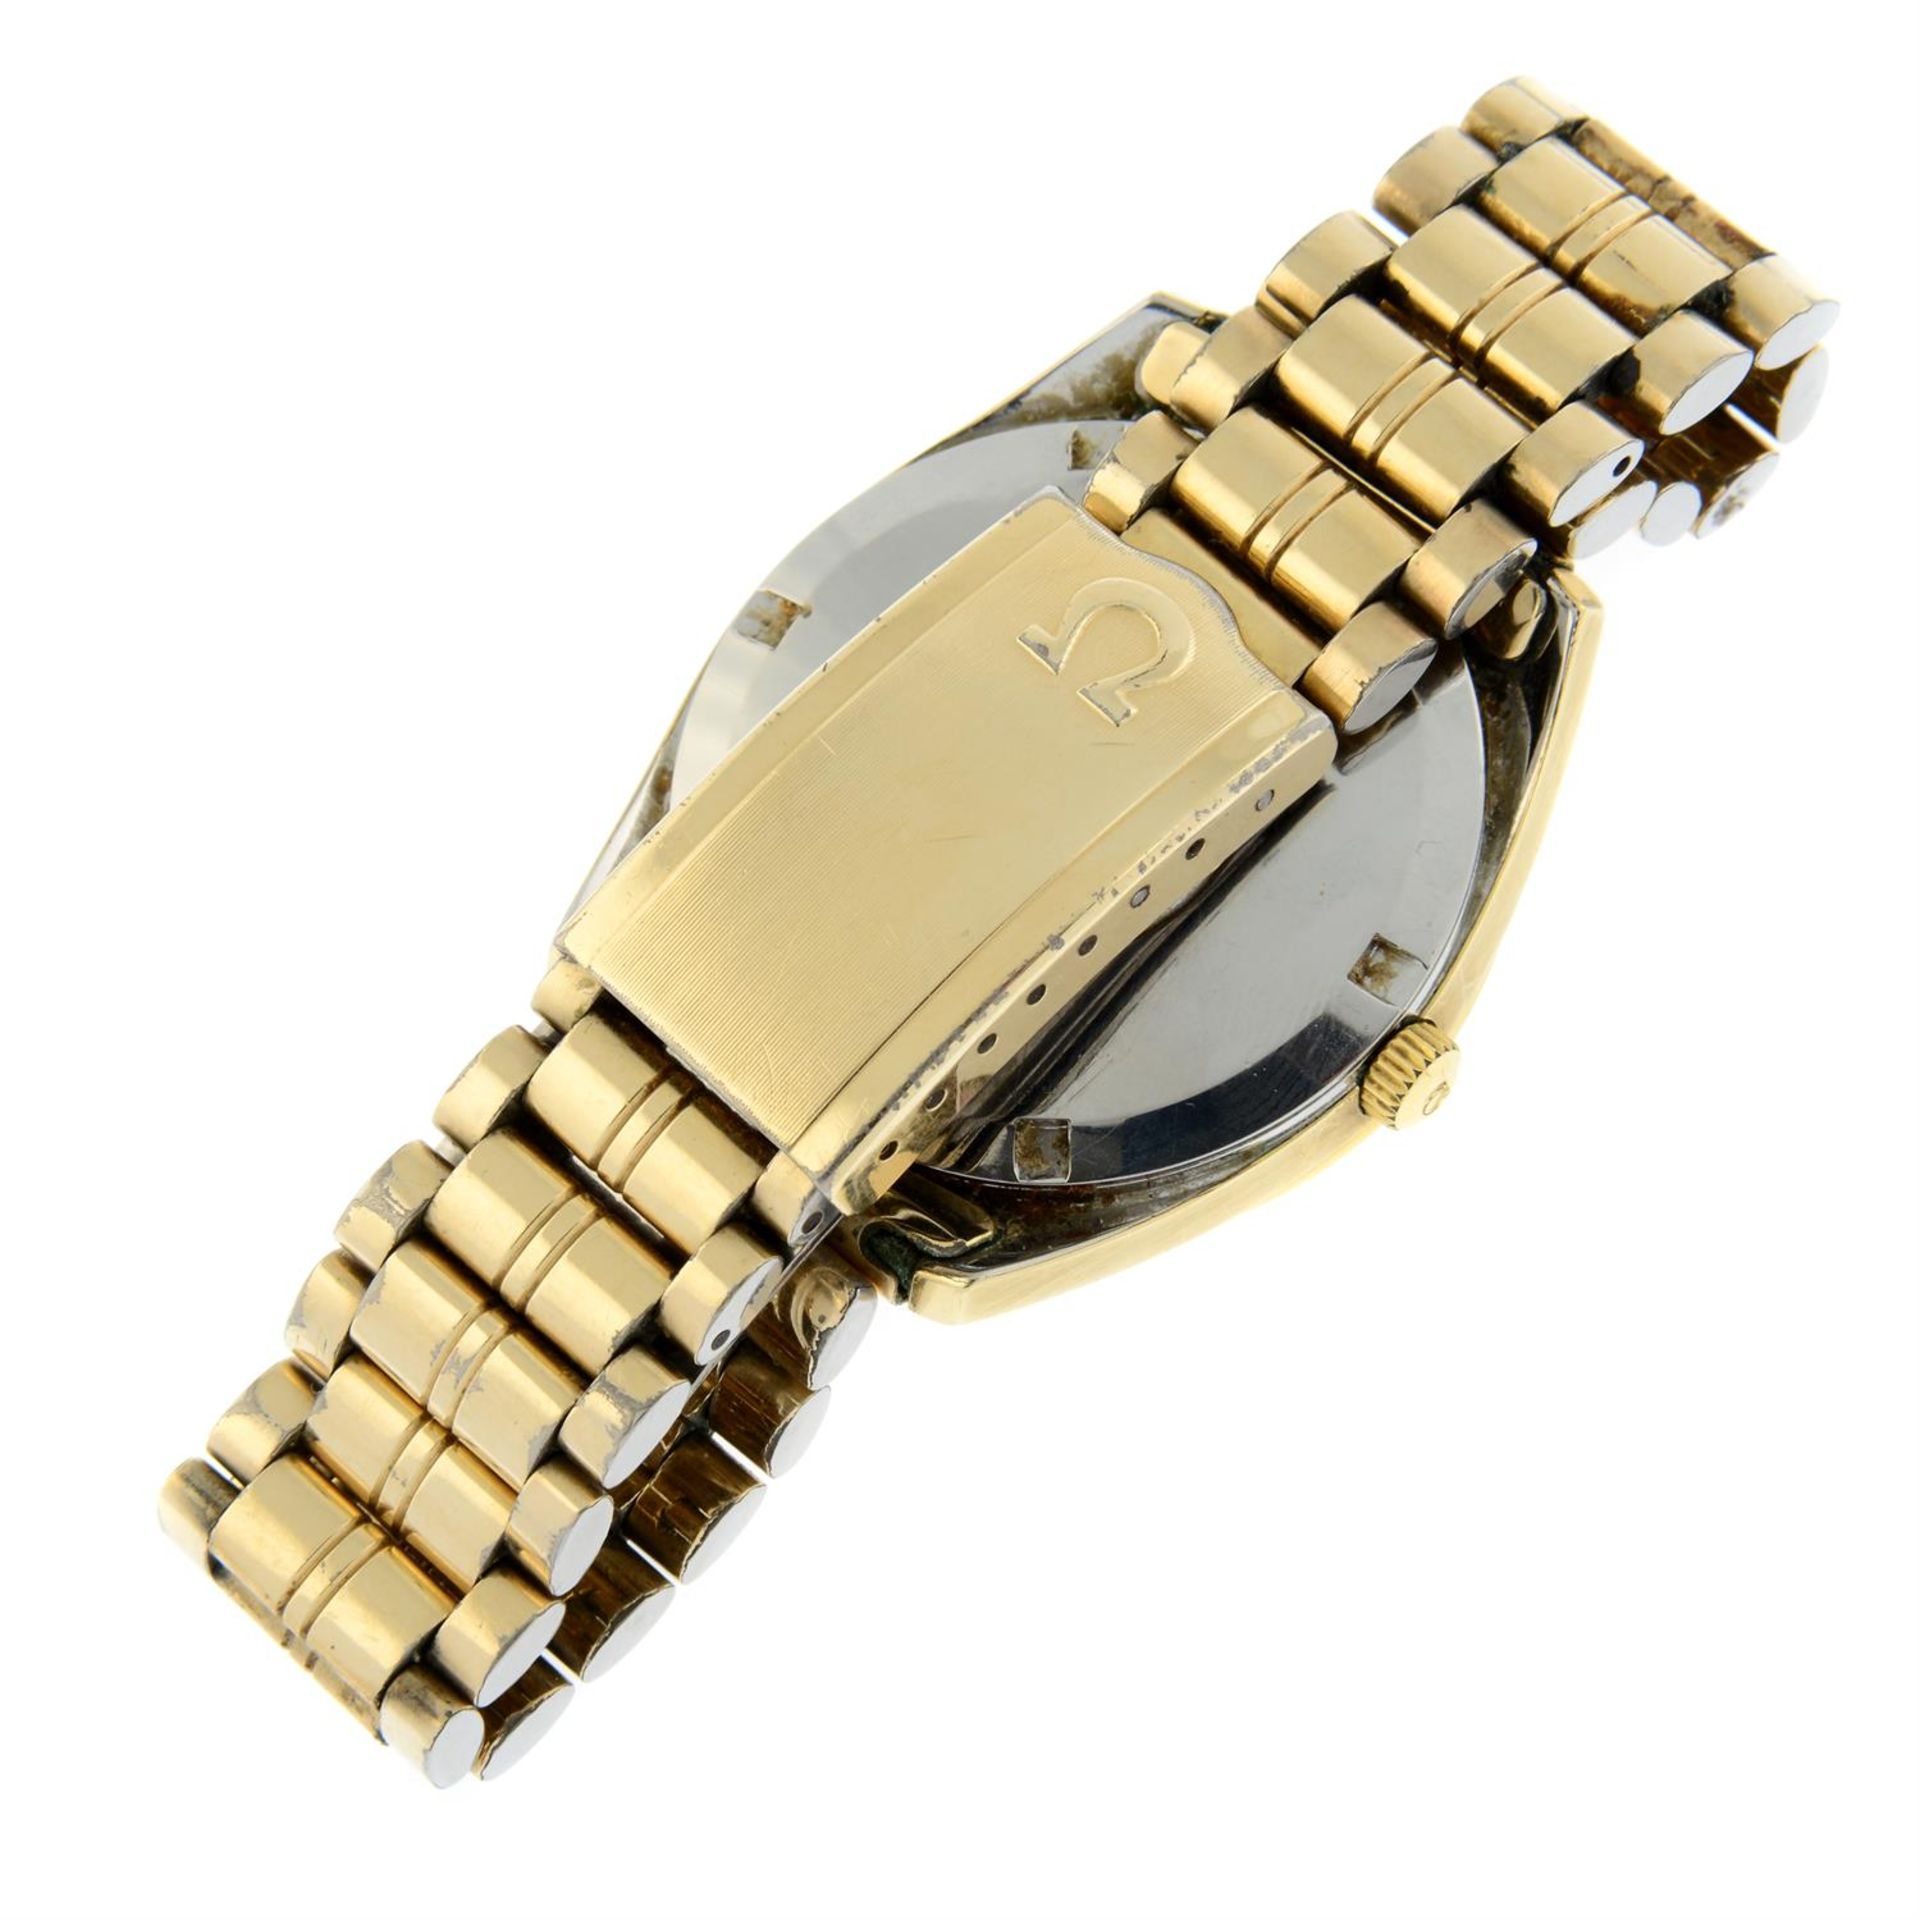 OMEGA - a gold plated Seamaster bracelet watch, 36mm. - Image 2 of 5